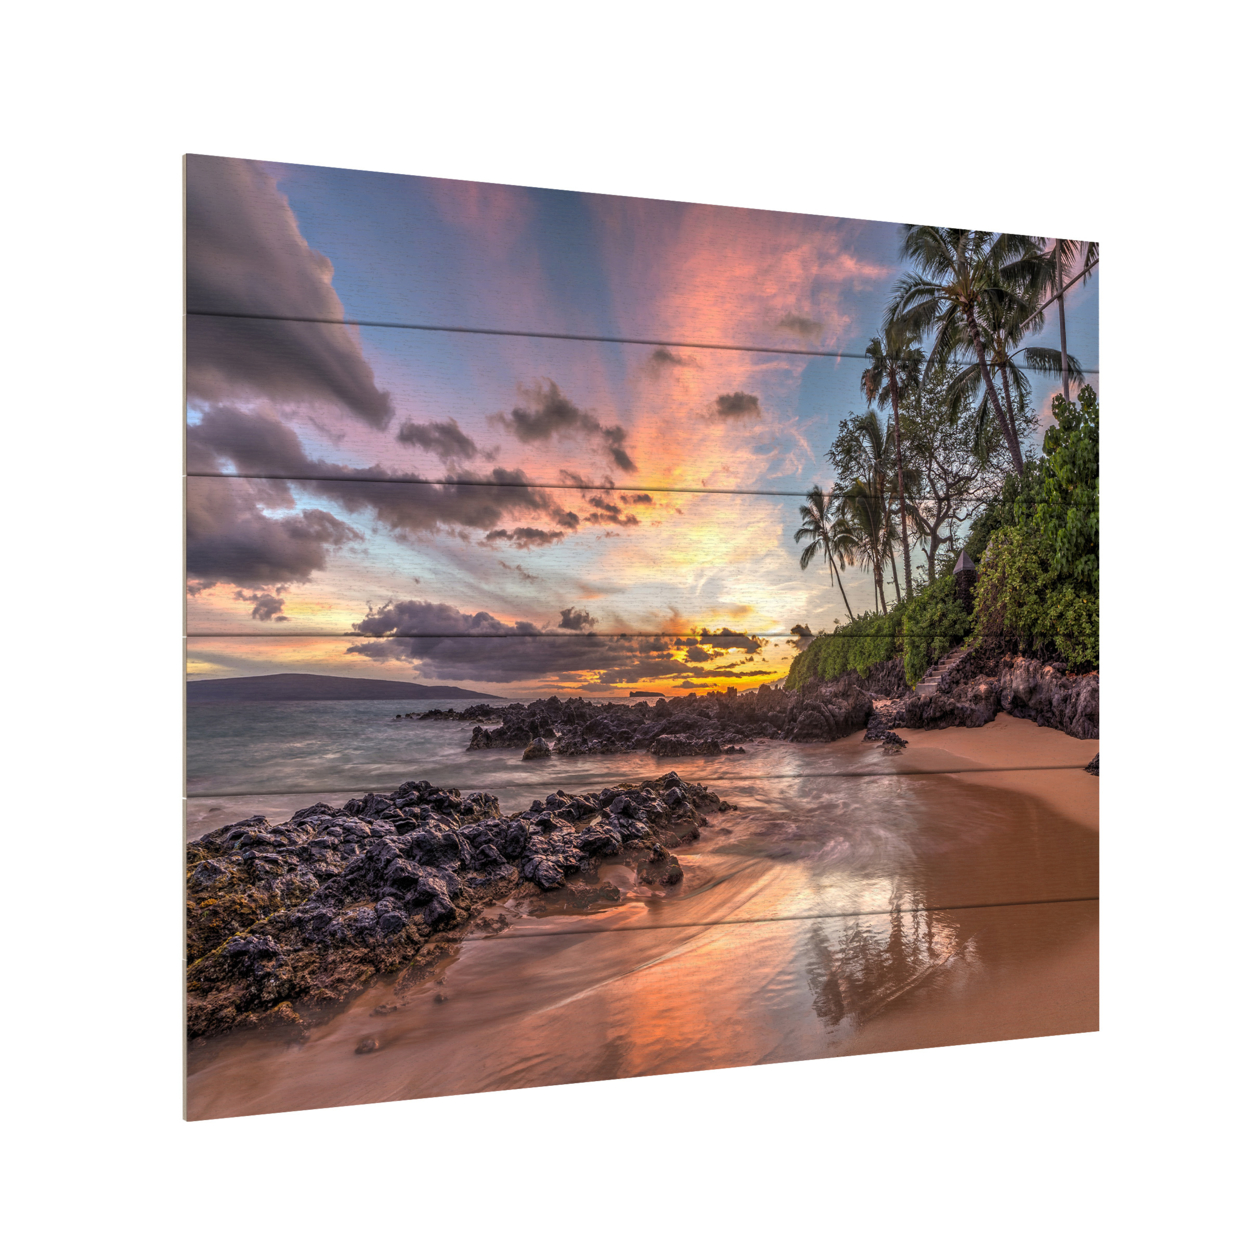 Wooden Slat Art 18 X 22 Inches Titled Hawaiian Sunset Wonder Ready To Hang Home Decor Picture